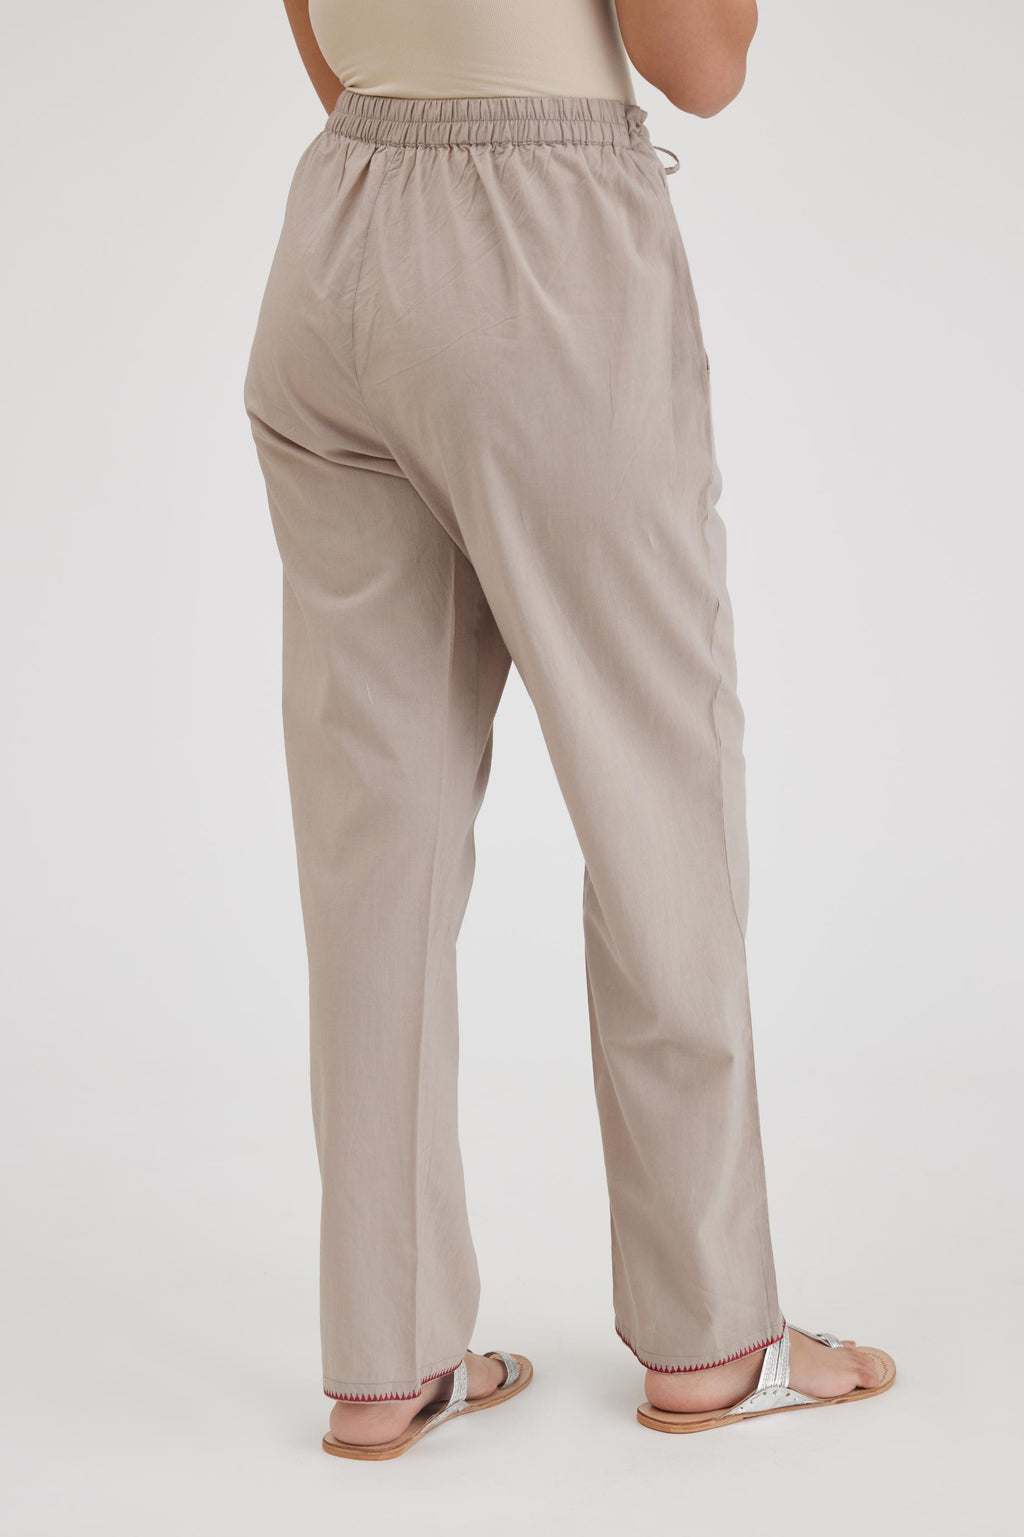 Grey cotton straight pants with contrasting thread embroidery at hem.